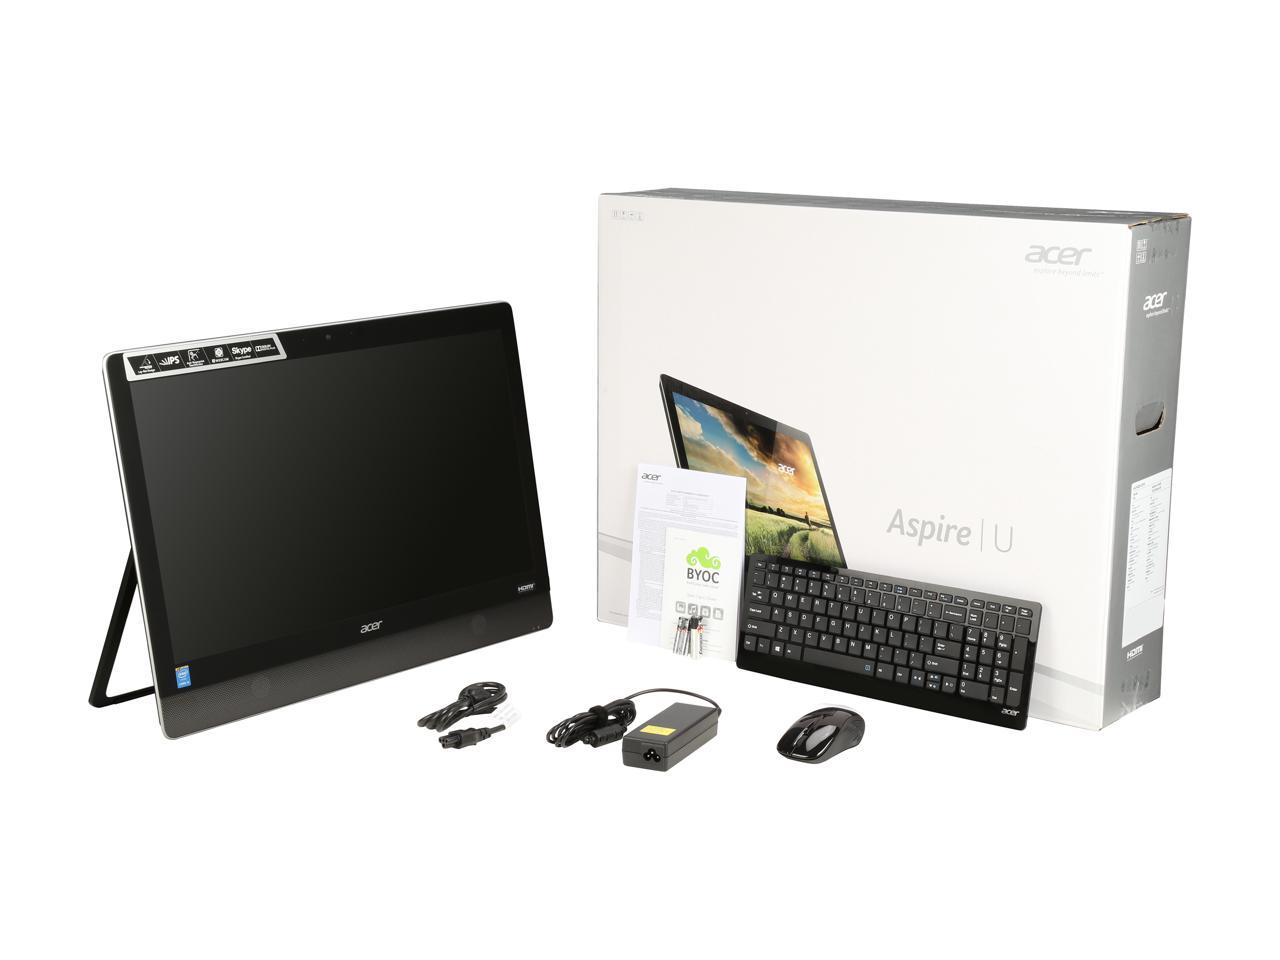 Open Box: Acer All-in-One PC Aspire AU5-620-UB10 Intel Core i5 4200M (2